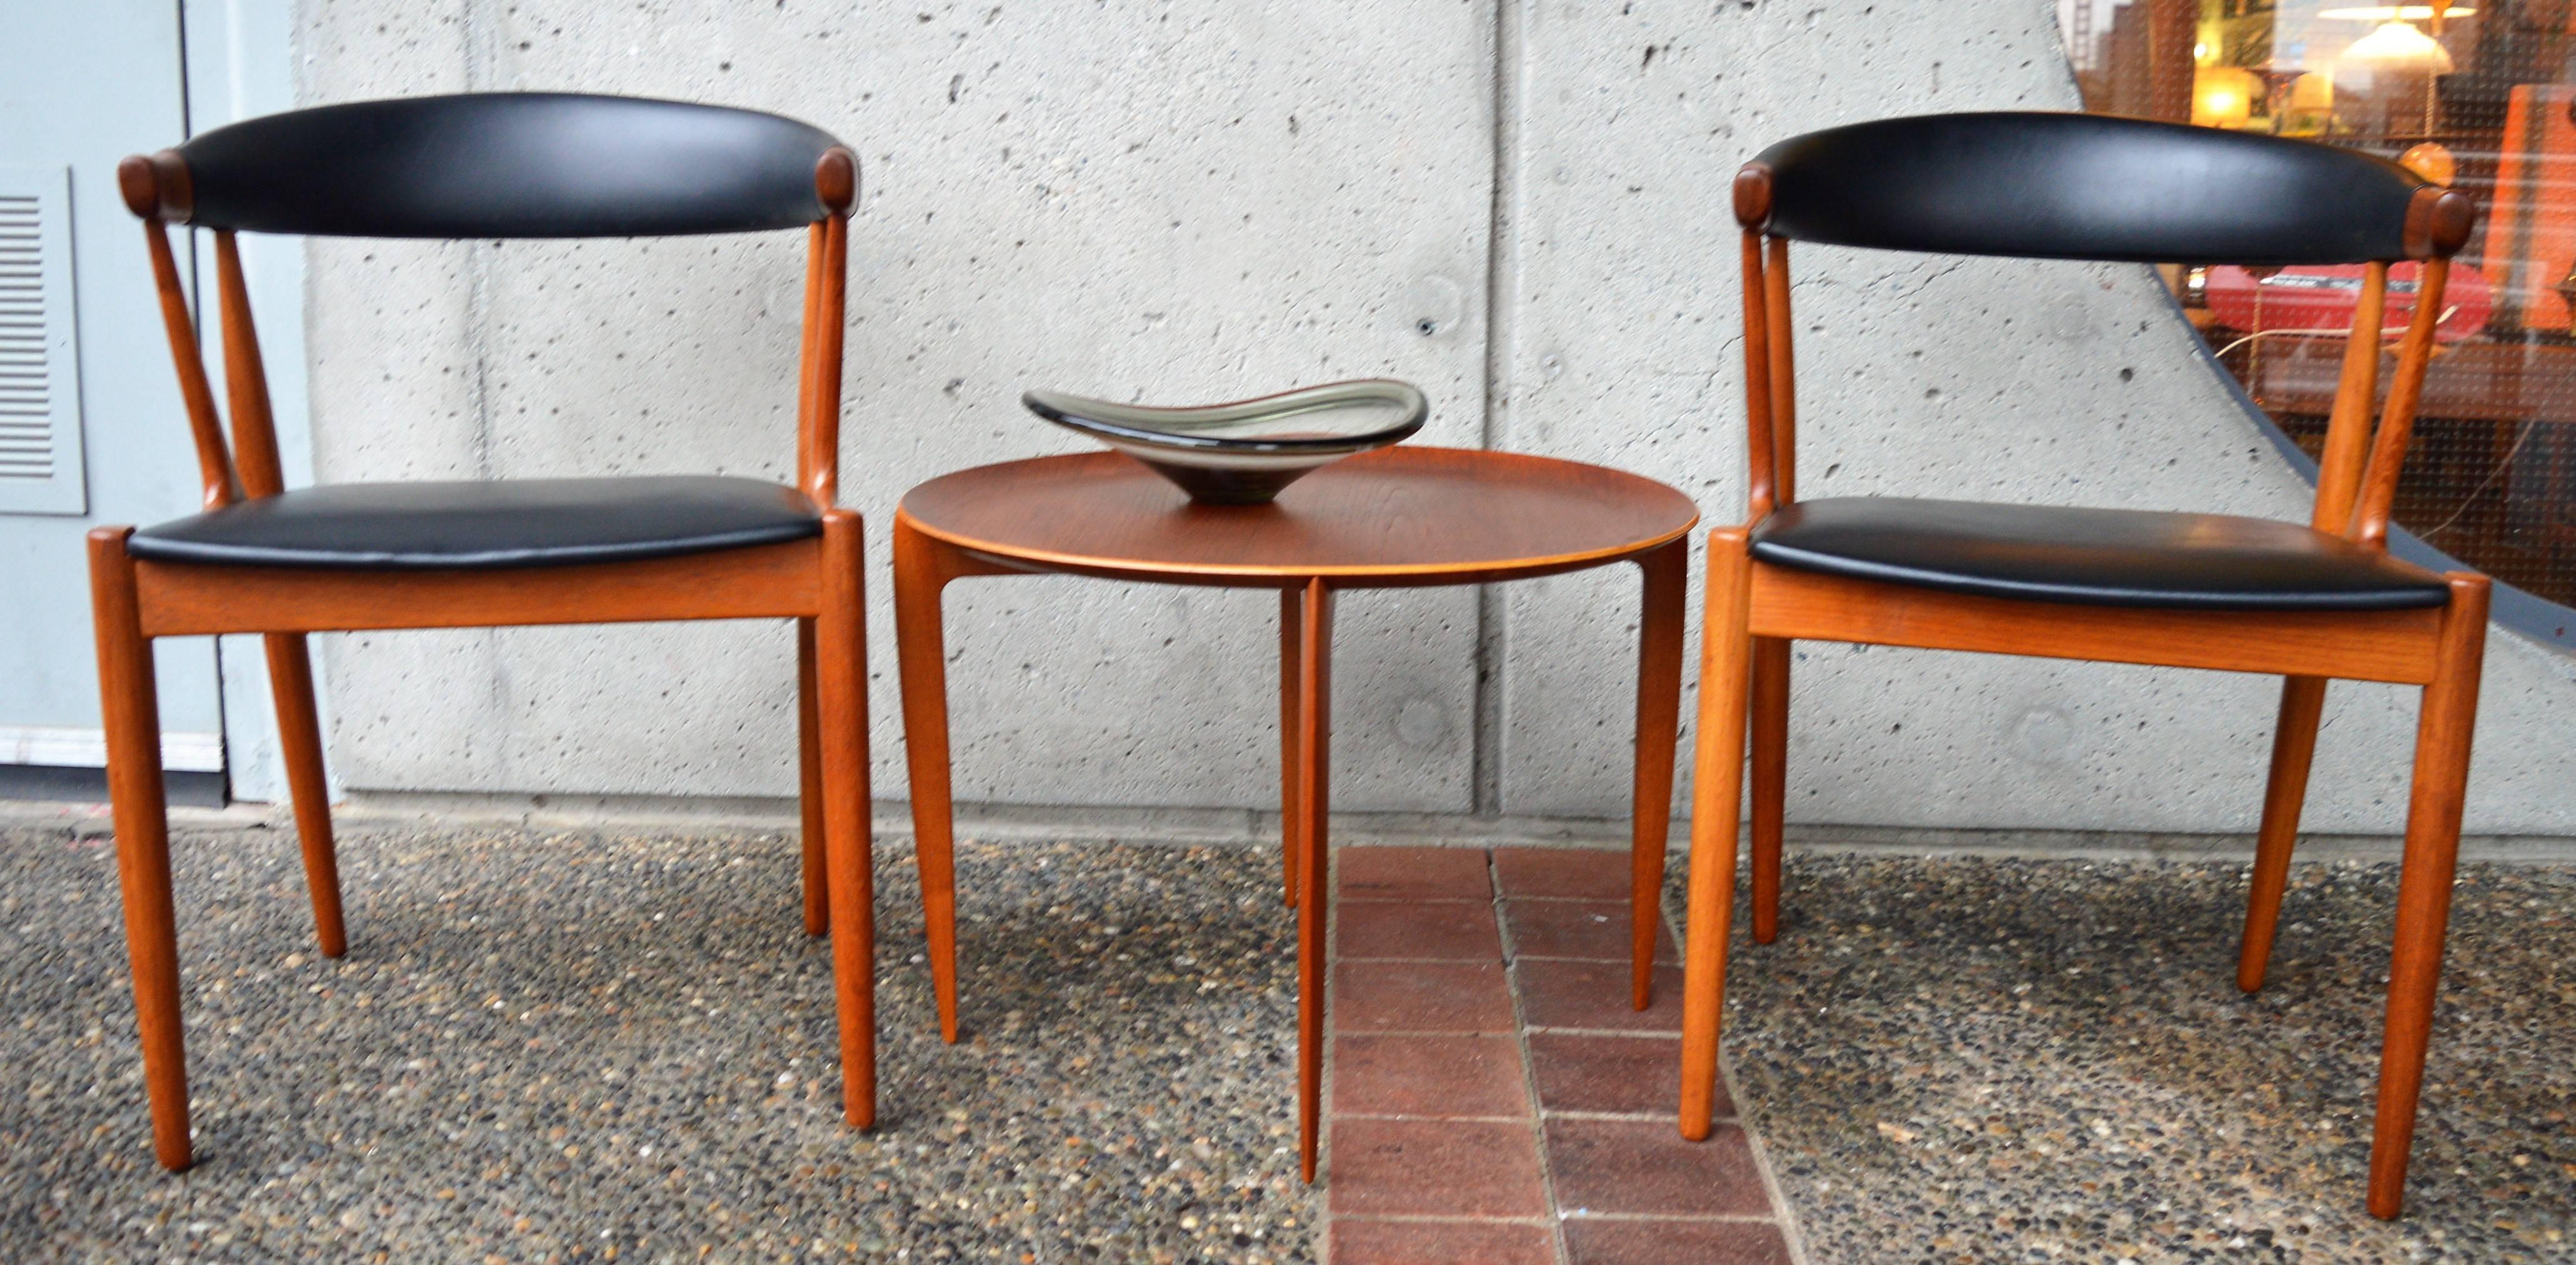 This gorgeous and iconic Danish modern teak side table was designed by H Engholm and Svend Aage Willumsen for Fritz Hansen in the 1960s. Featuring a sleek, tapering spider leg base that flares to hug the round tray top which is removable.